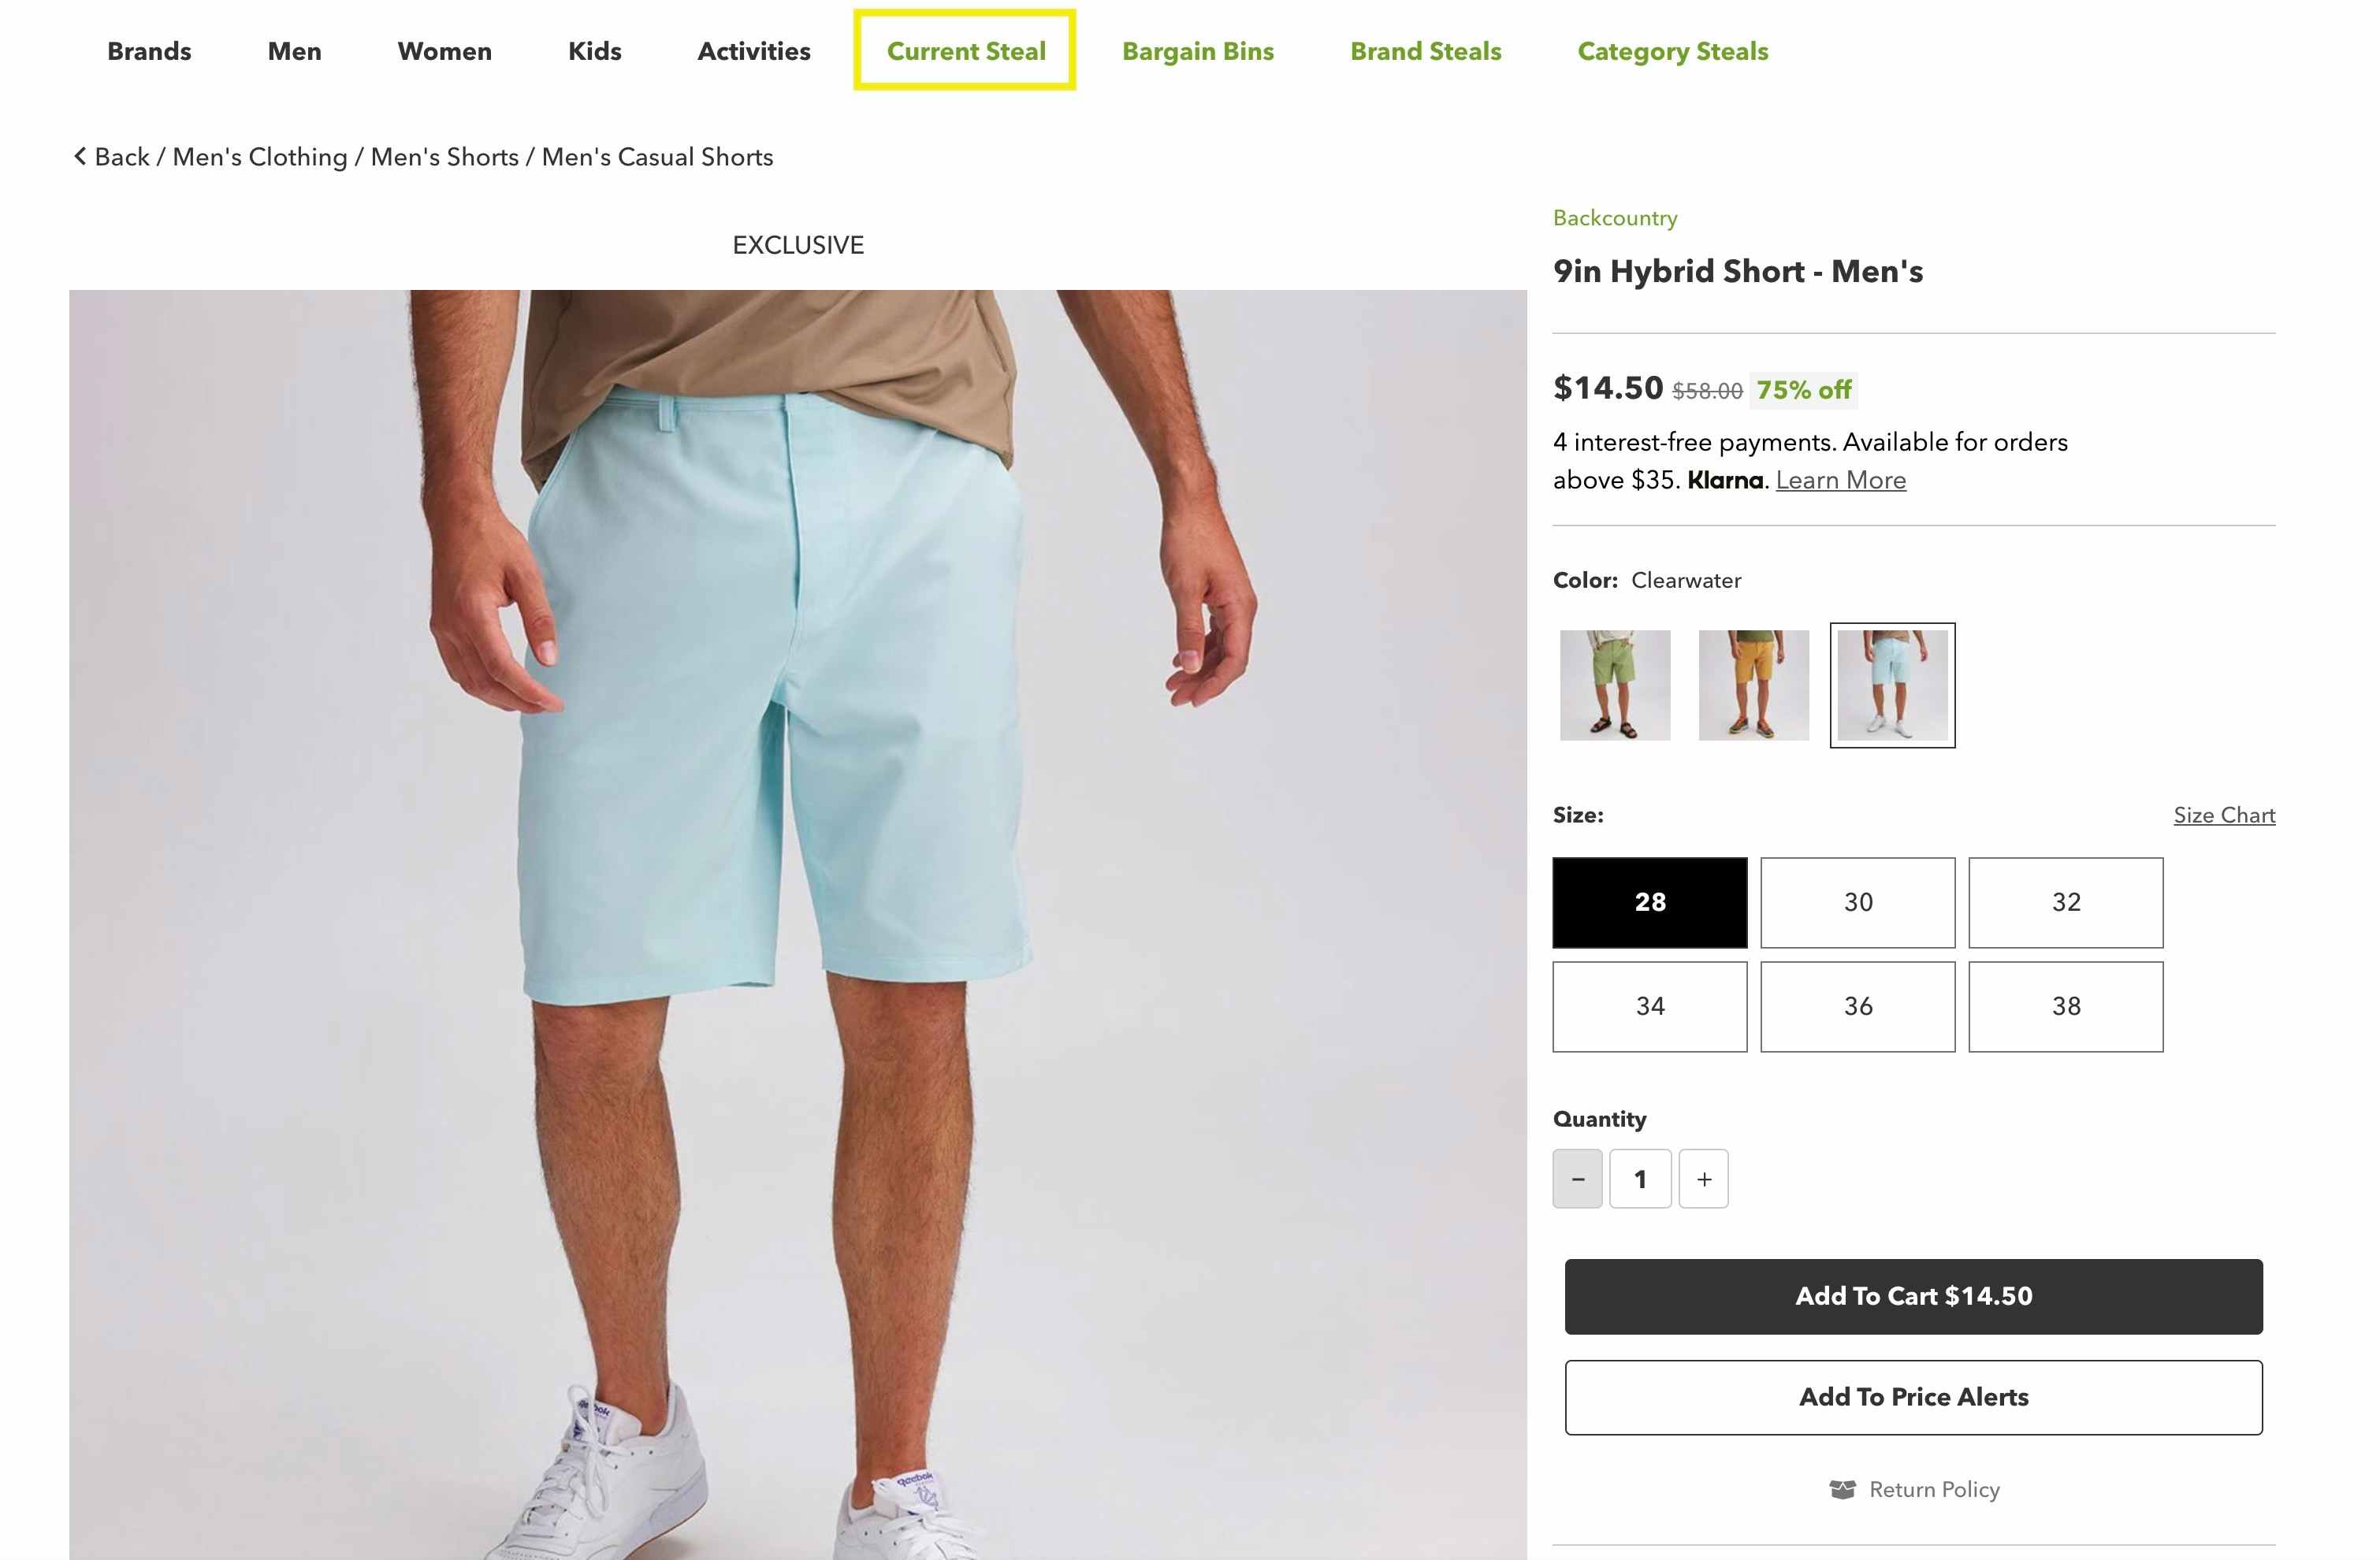 Steep and Cheap's current steal featuring 9-inch hybrid men's Backcountry shorts for 75% off